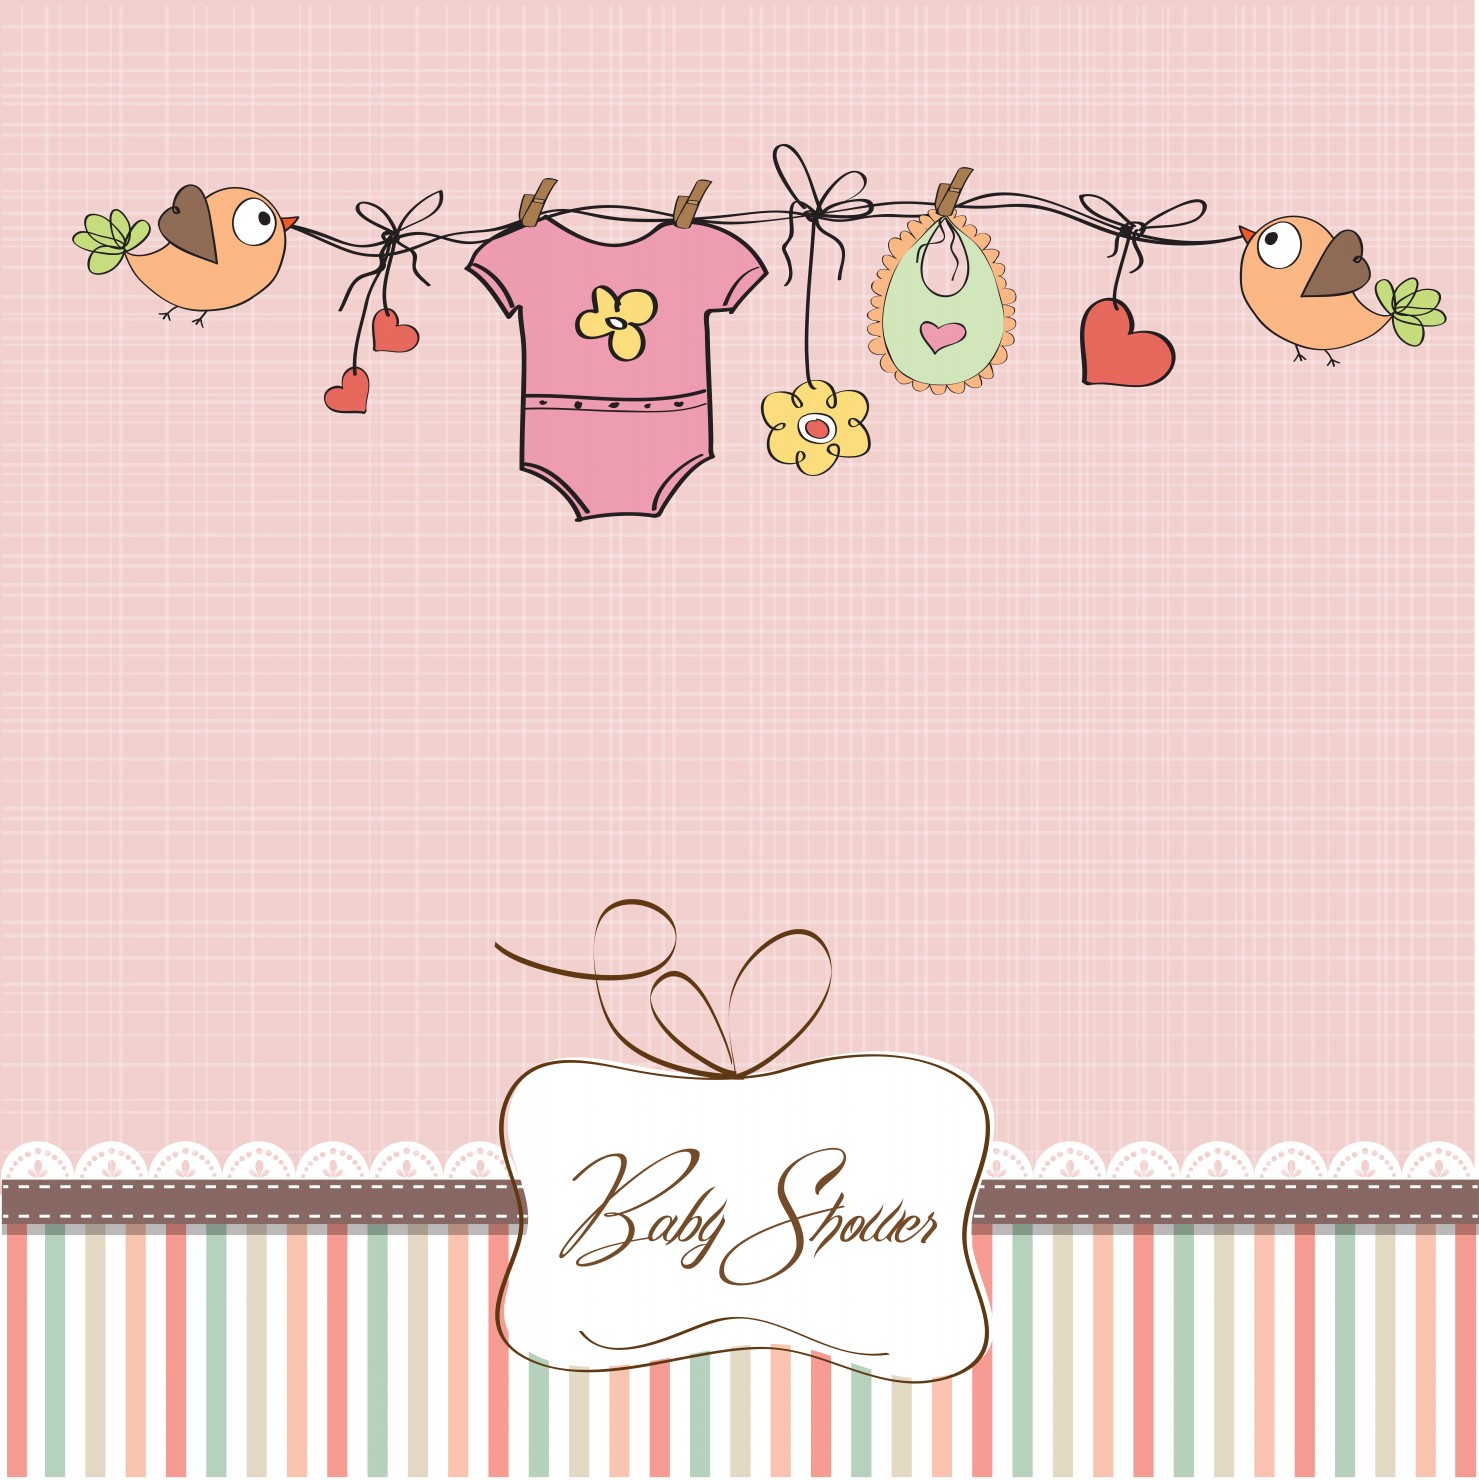 Printable Baby Shower Cards Looking For A Fun Baby Shower Game 